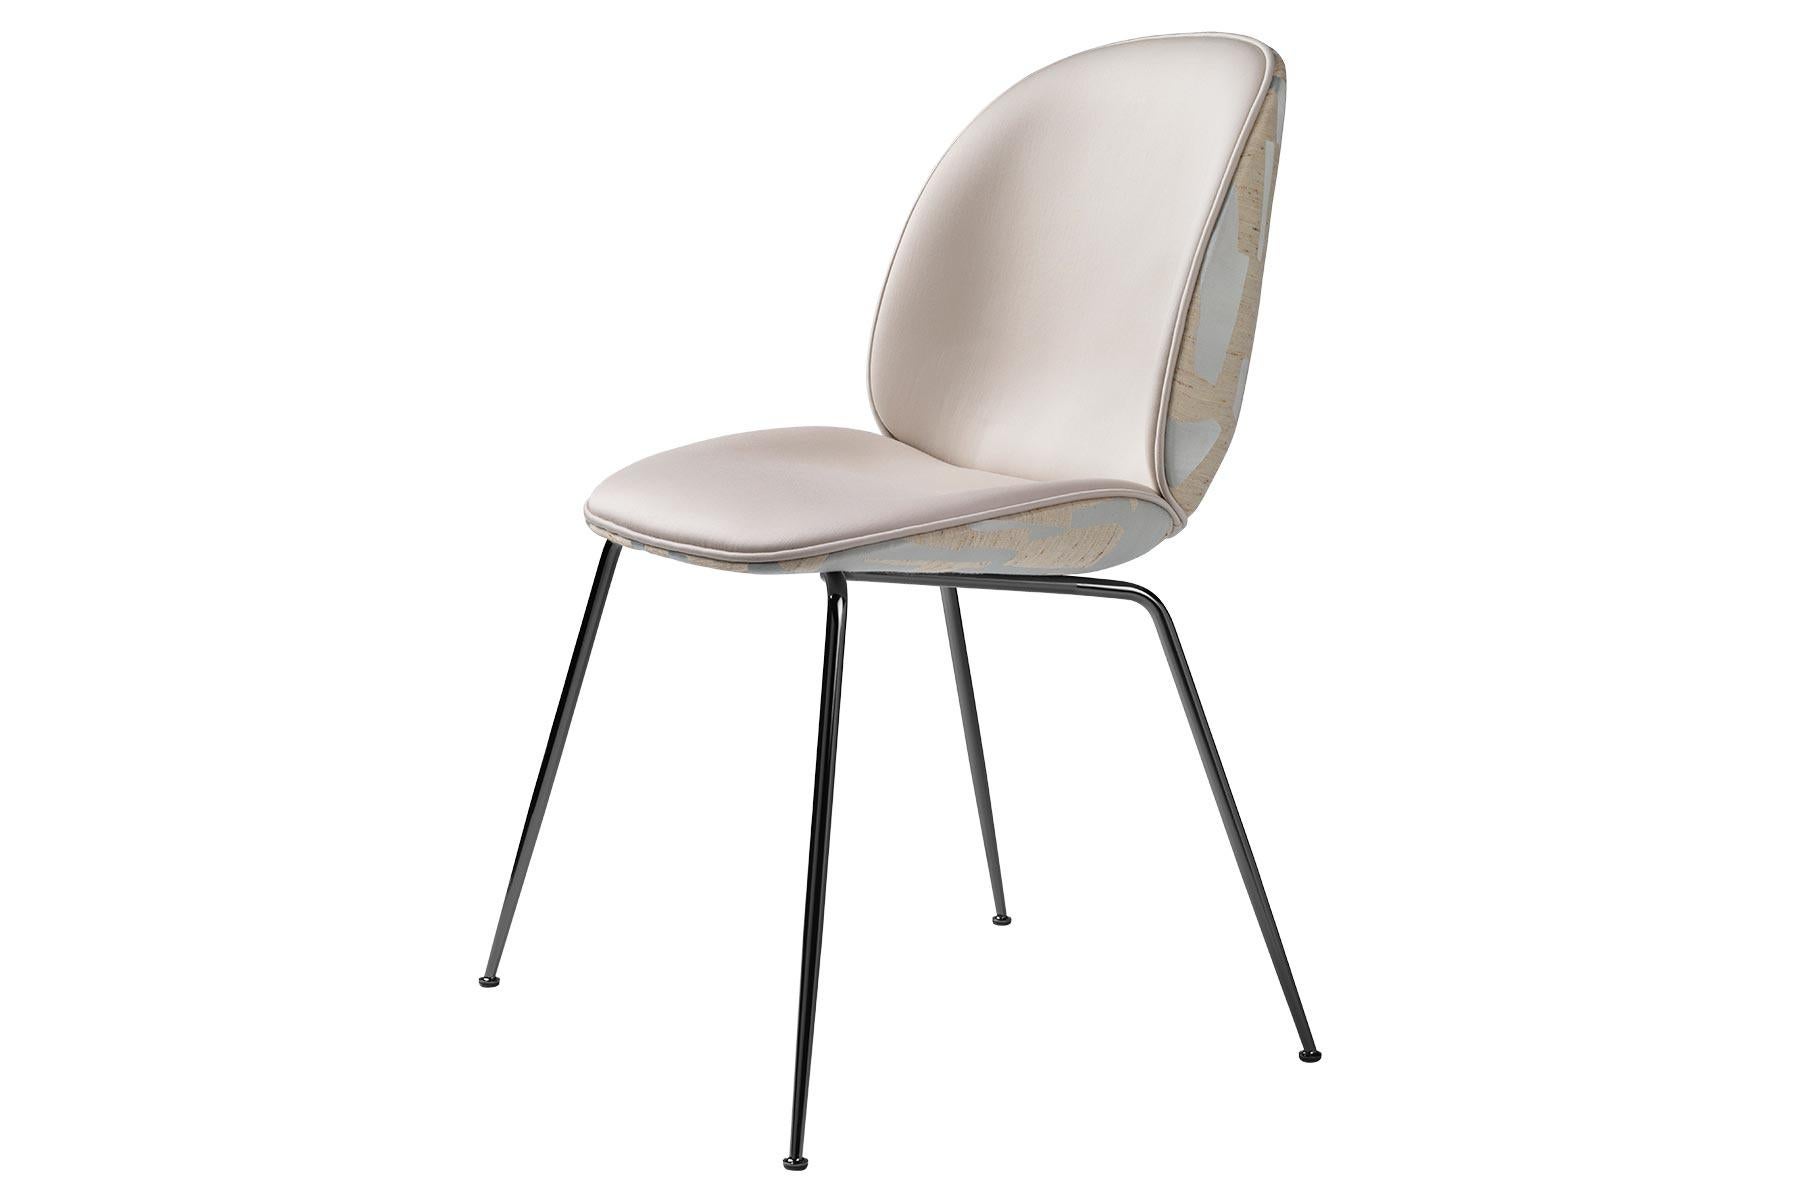 Beetle Dining Chair, Fully Upholstered, Conic Base, Black Chrome In New Condition For Sale In Berkeley, CA